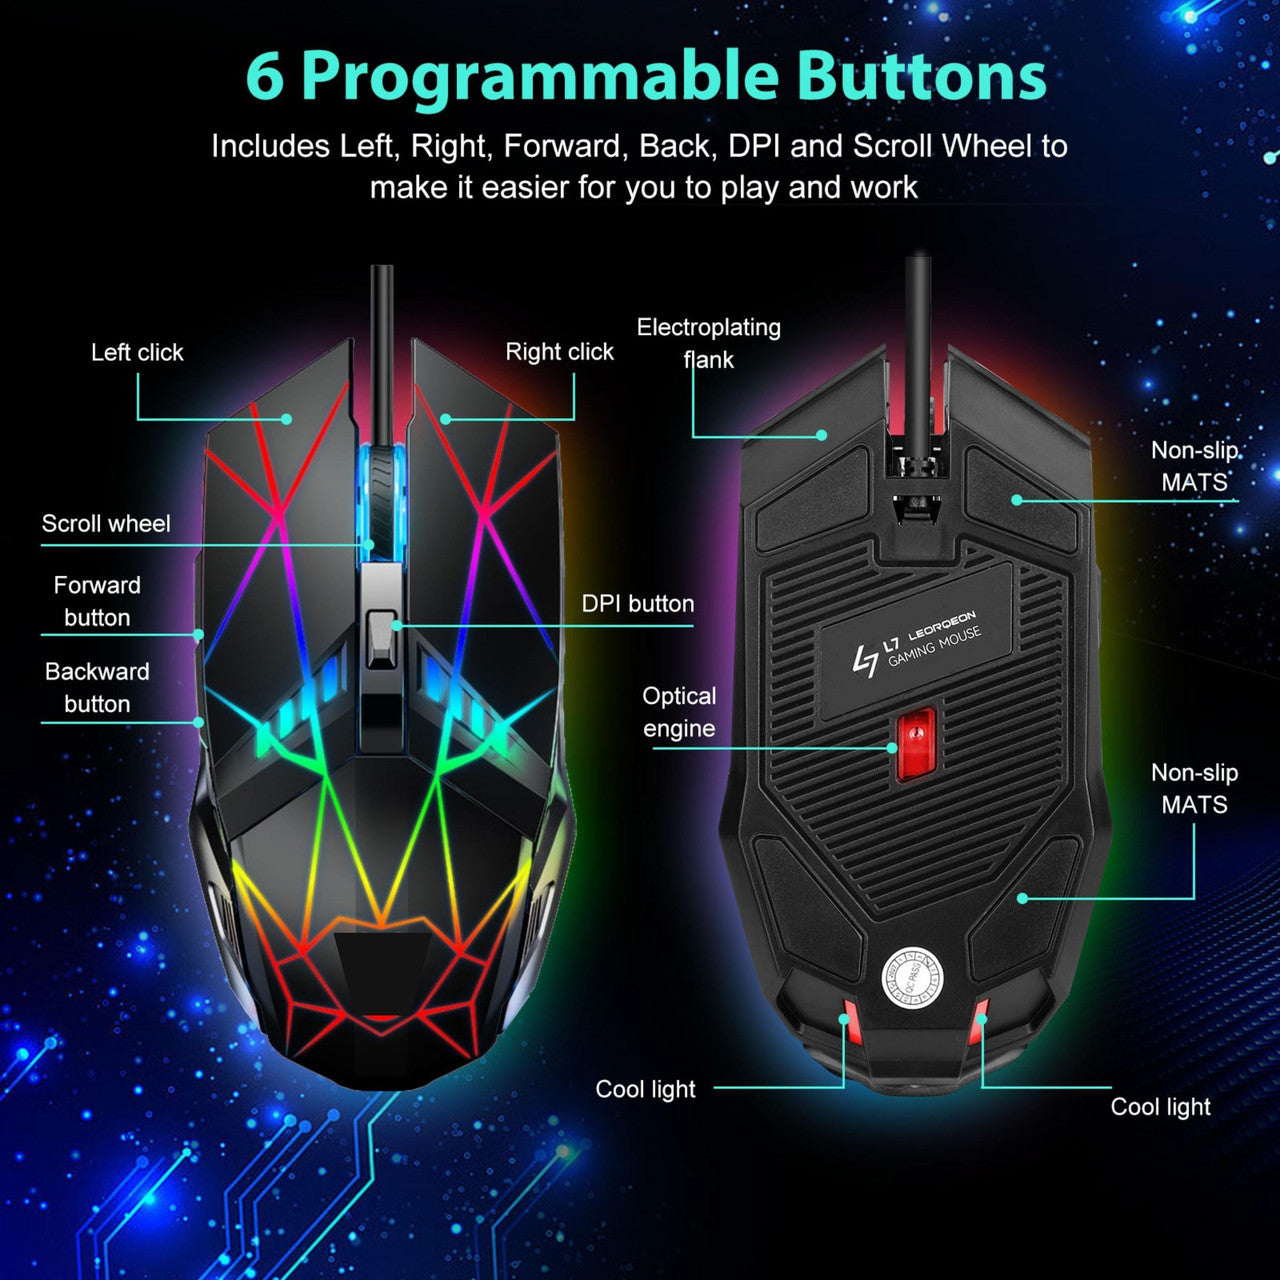 Ergonomic LED Wired Gaming Mouse - Laptop Computer Mice with 6 Programmable Buttons, 4 Adjustable DPI Up to 4800